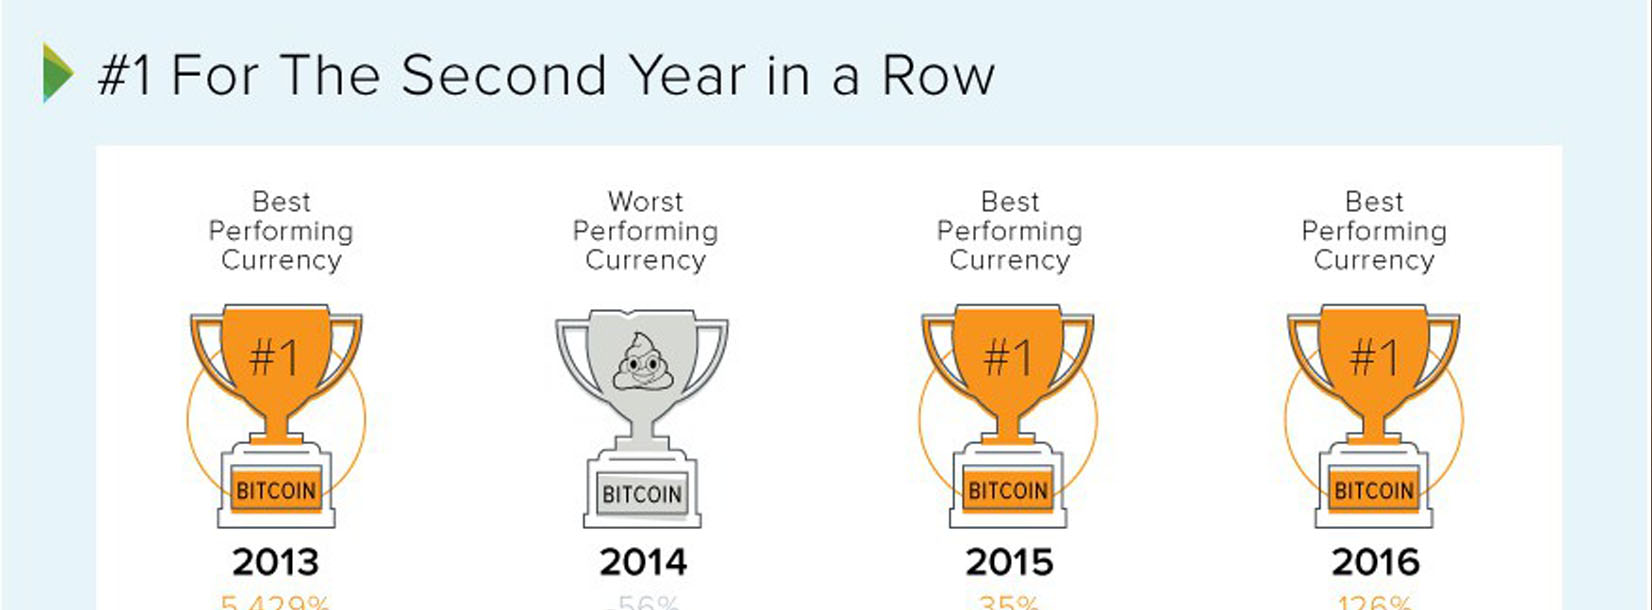 Bitcoin: The Top Performing Currency For a Second Year in a Row